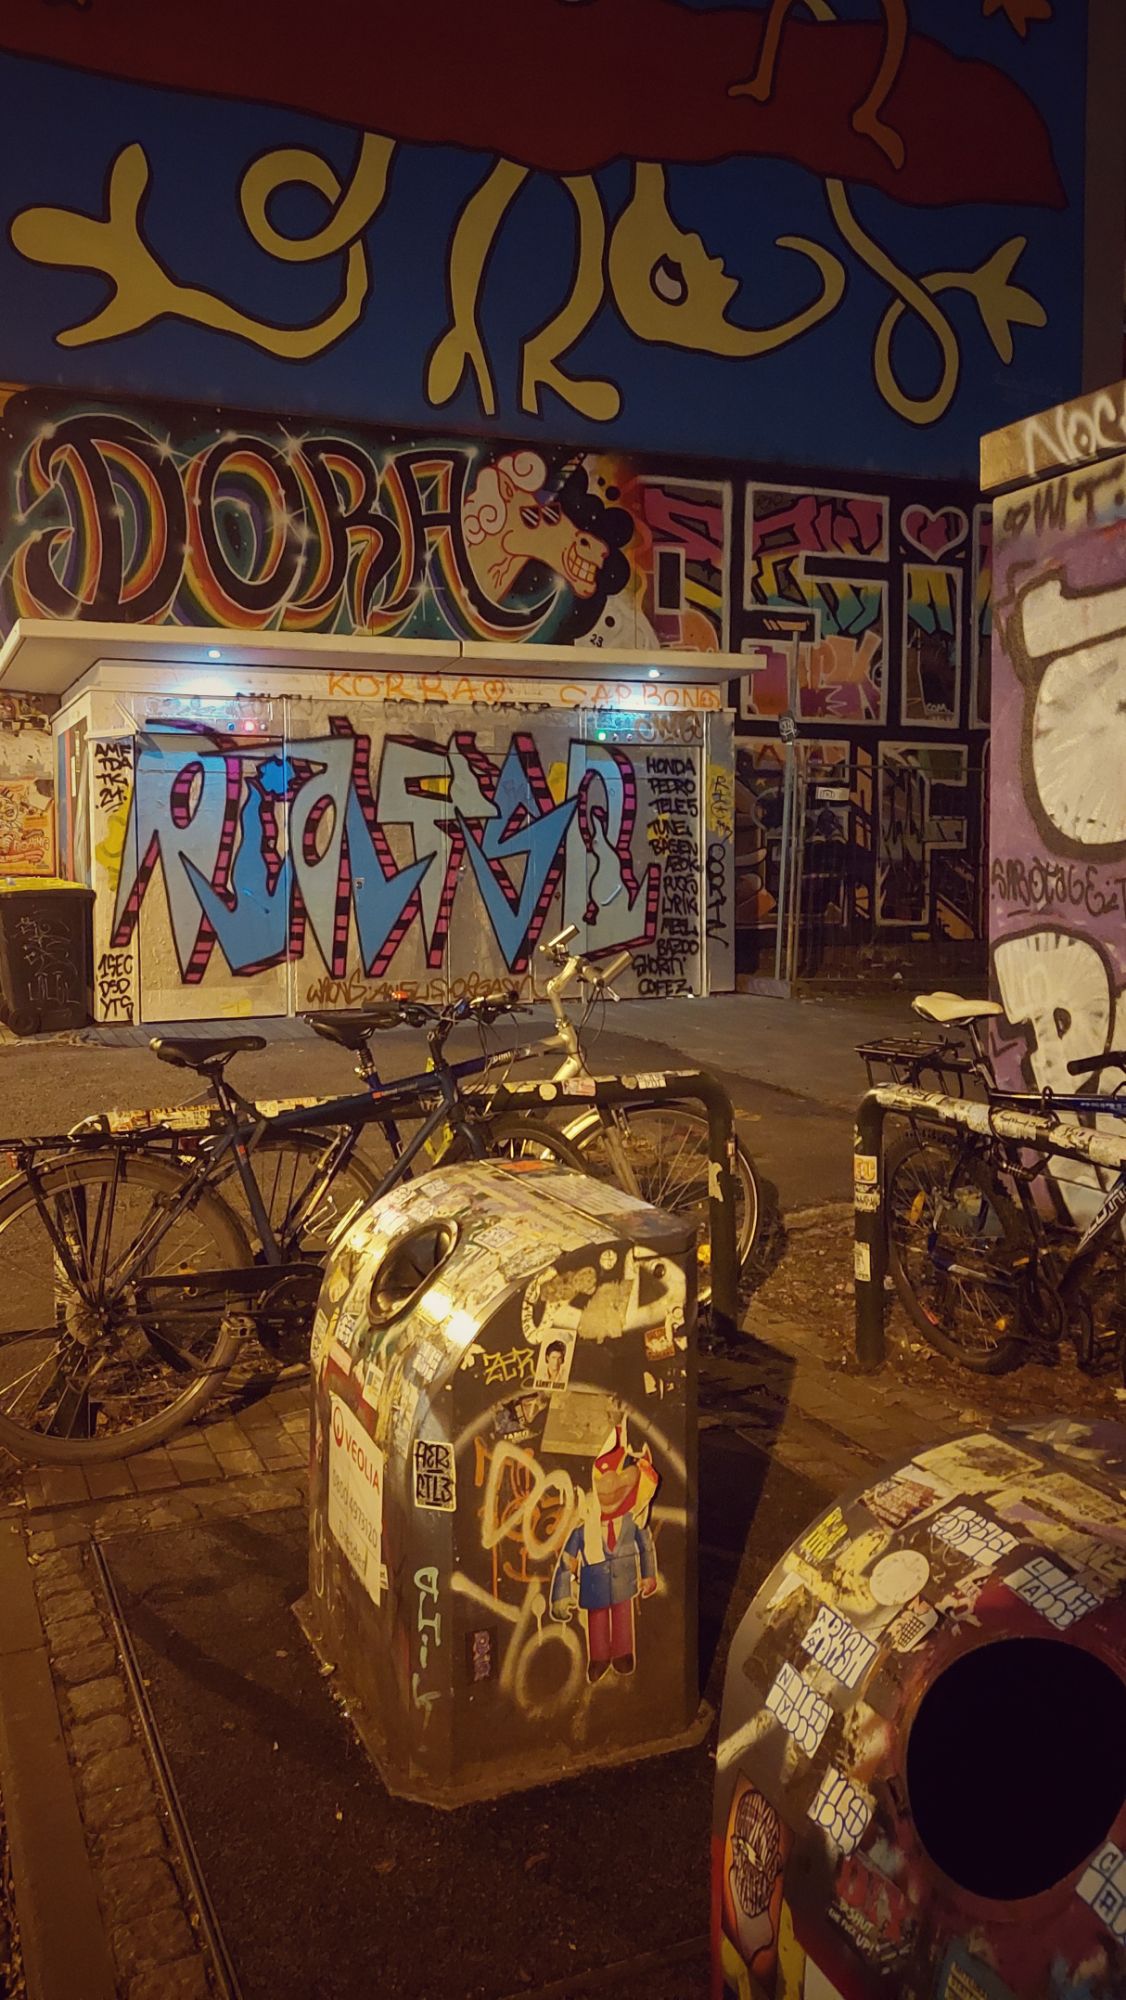 Street scene: A graffiti-laden wall, bicycles tied to iron bars, and garbage cans in the foreground, stickered over and over.